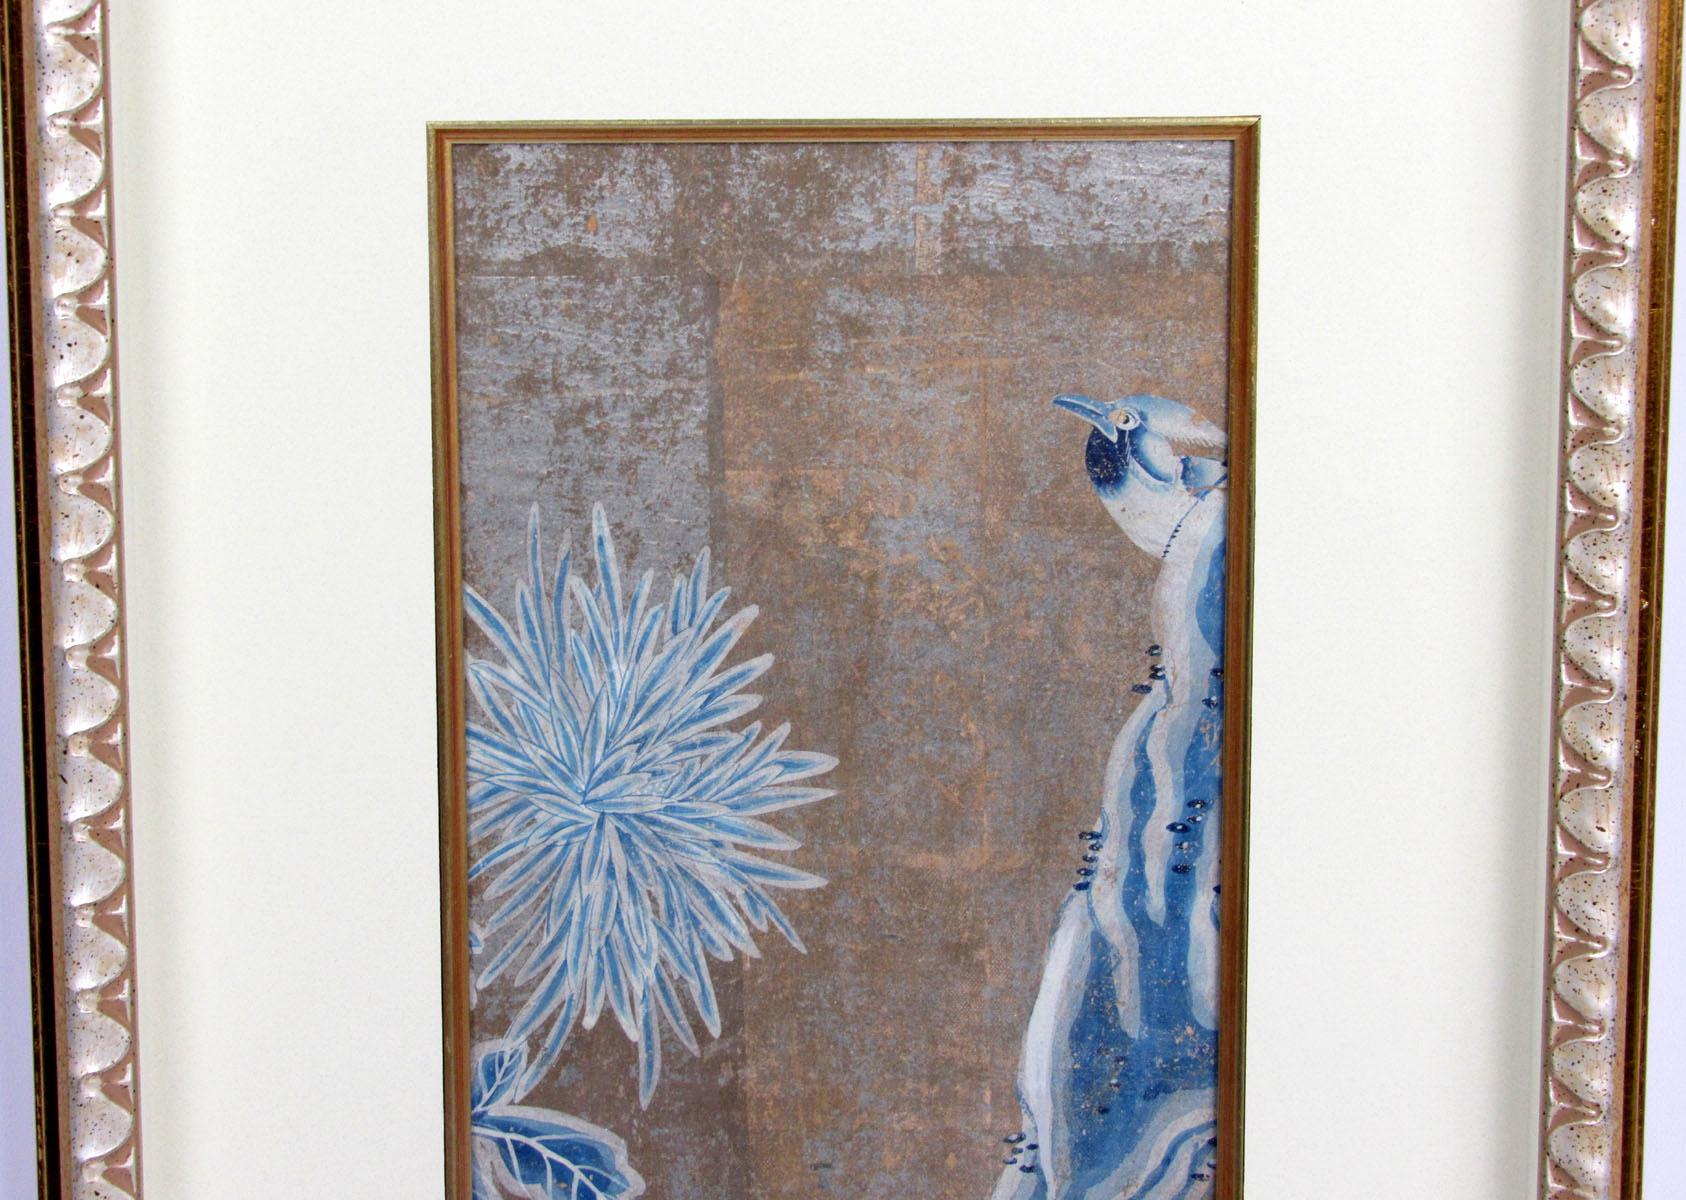 18th century Chinese hand-painted wallpaper panel featuring blue and white florals and bird painted onto a gold background, now mounted into a modern frame.